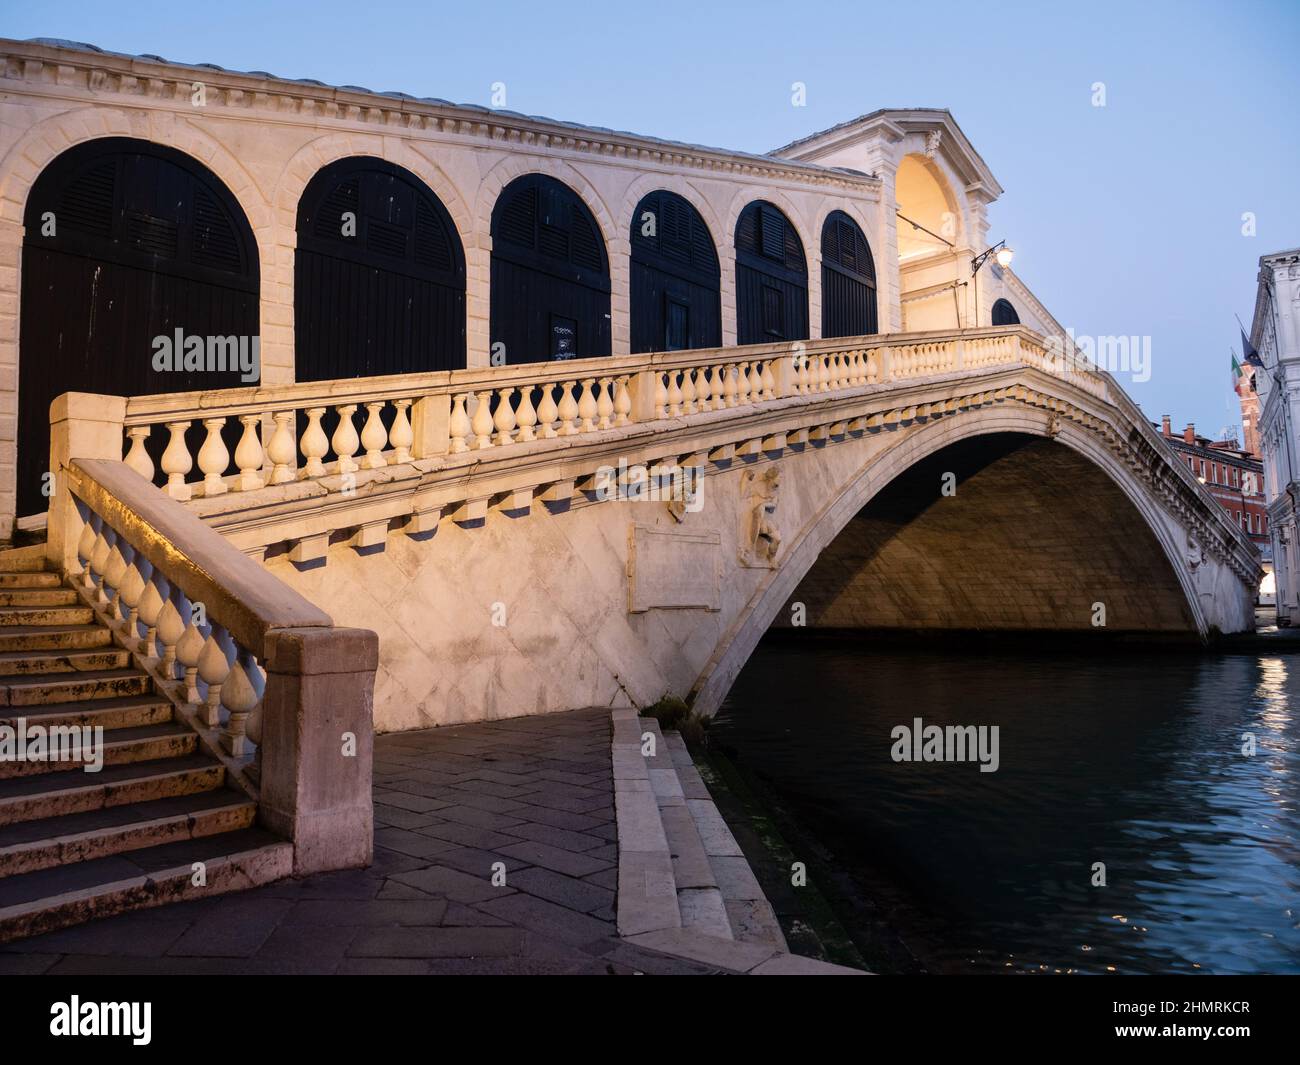 Rialto Bridge or Ponte di Rialto in Venice, Italy, Illuminated and Lonely in the Blue Hour of the Early Morning Stock Photo